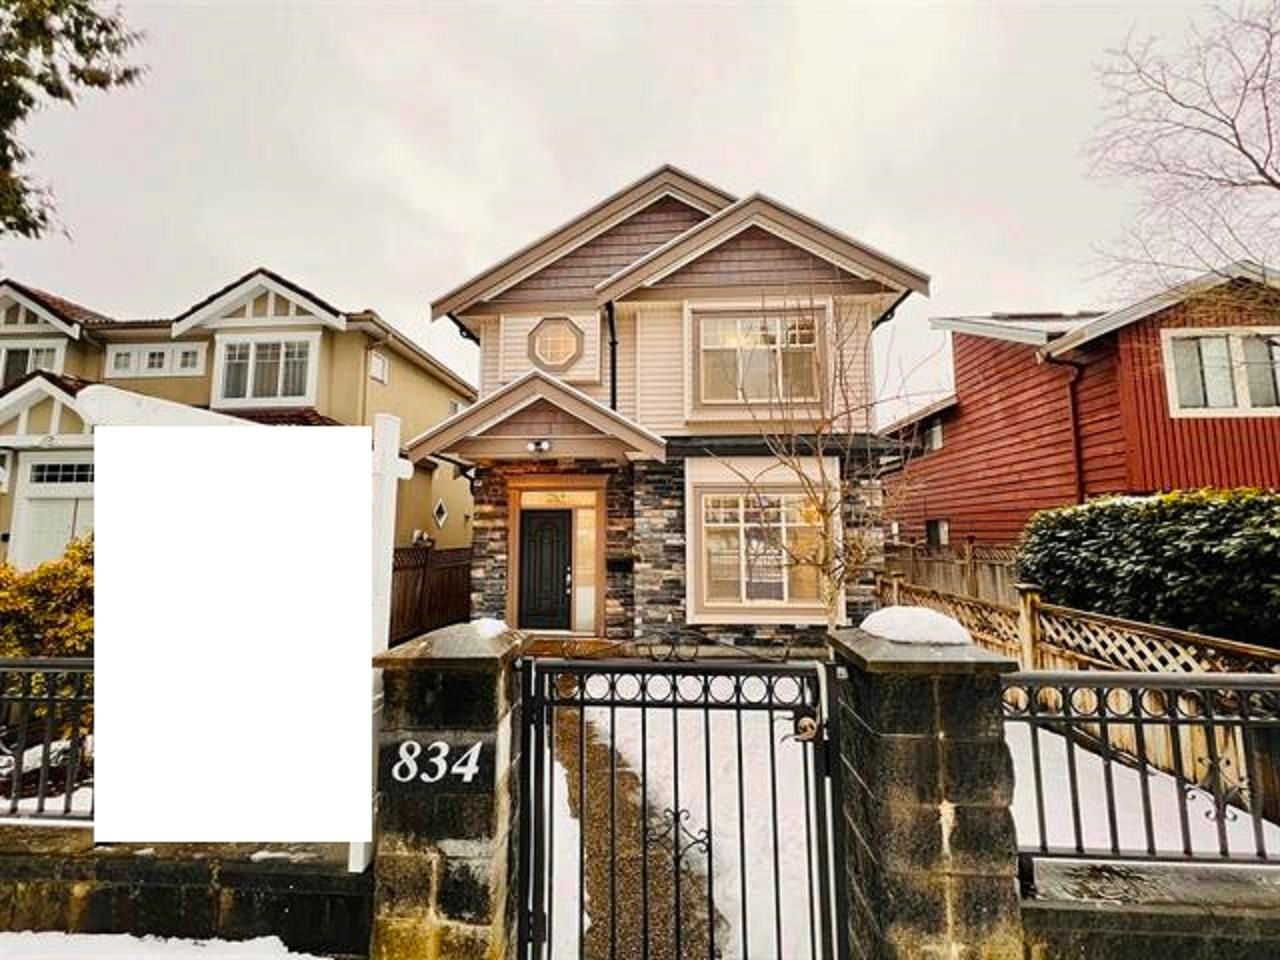 Main Photo: 834 W 69TH Avenue in Vancouver: Marpole 1/2 Duplex for sale (Vancouver West)  : MLS®# R2640937